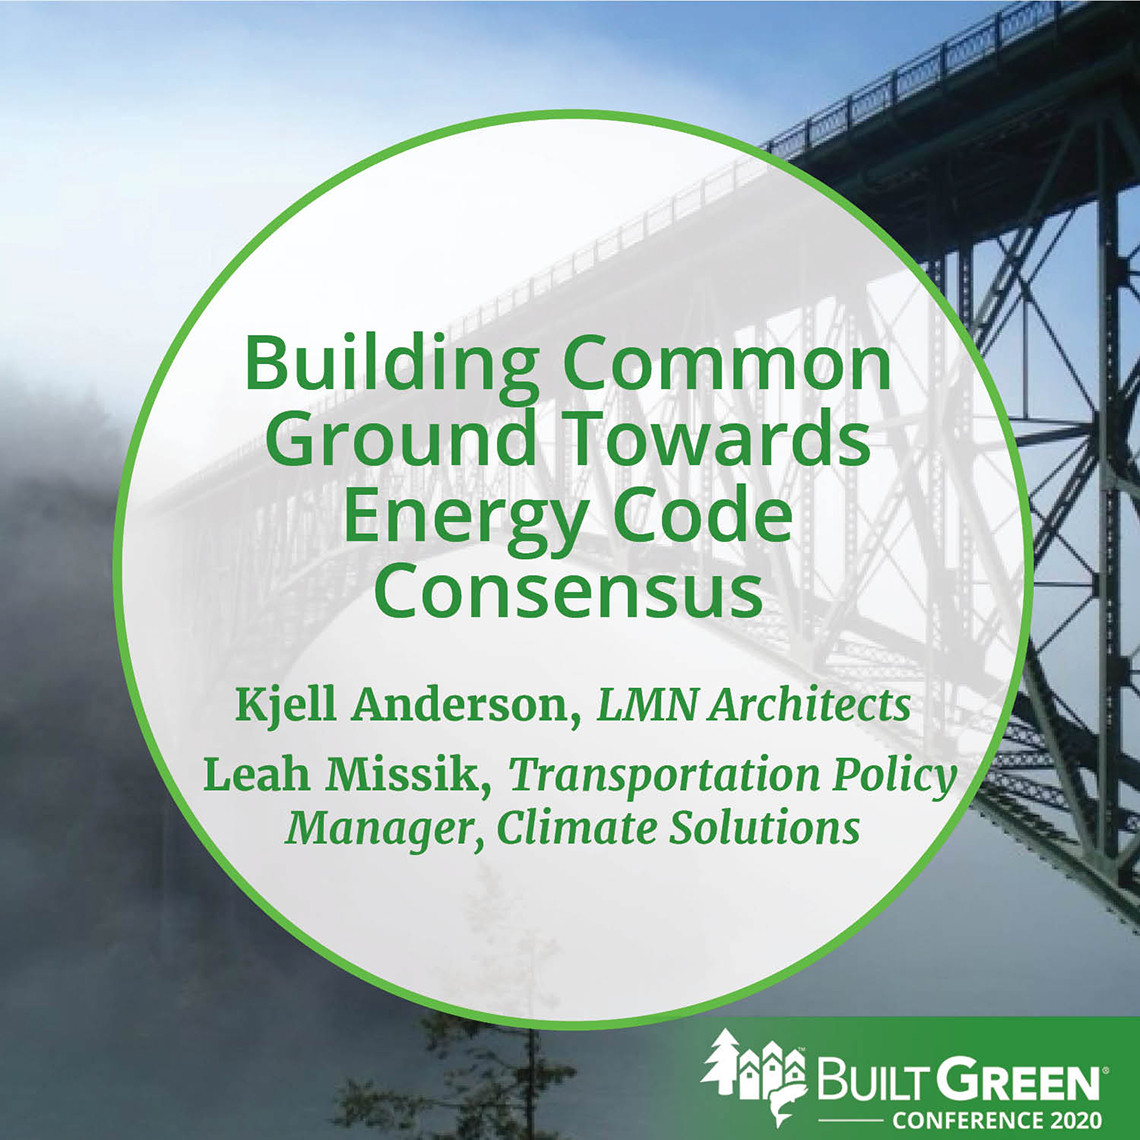 Built Green Conference Session: Building Common Ground Towards Energy Code Consensus, featuring Kjell Anderson, LMN Architects; Leah Missik, transportation policy manager, Climate Solutions